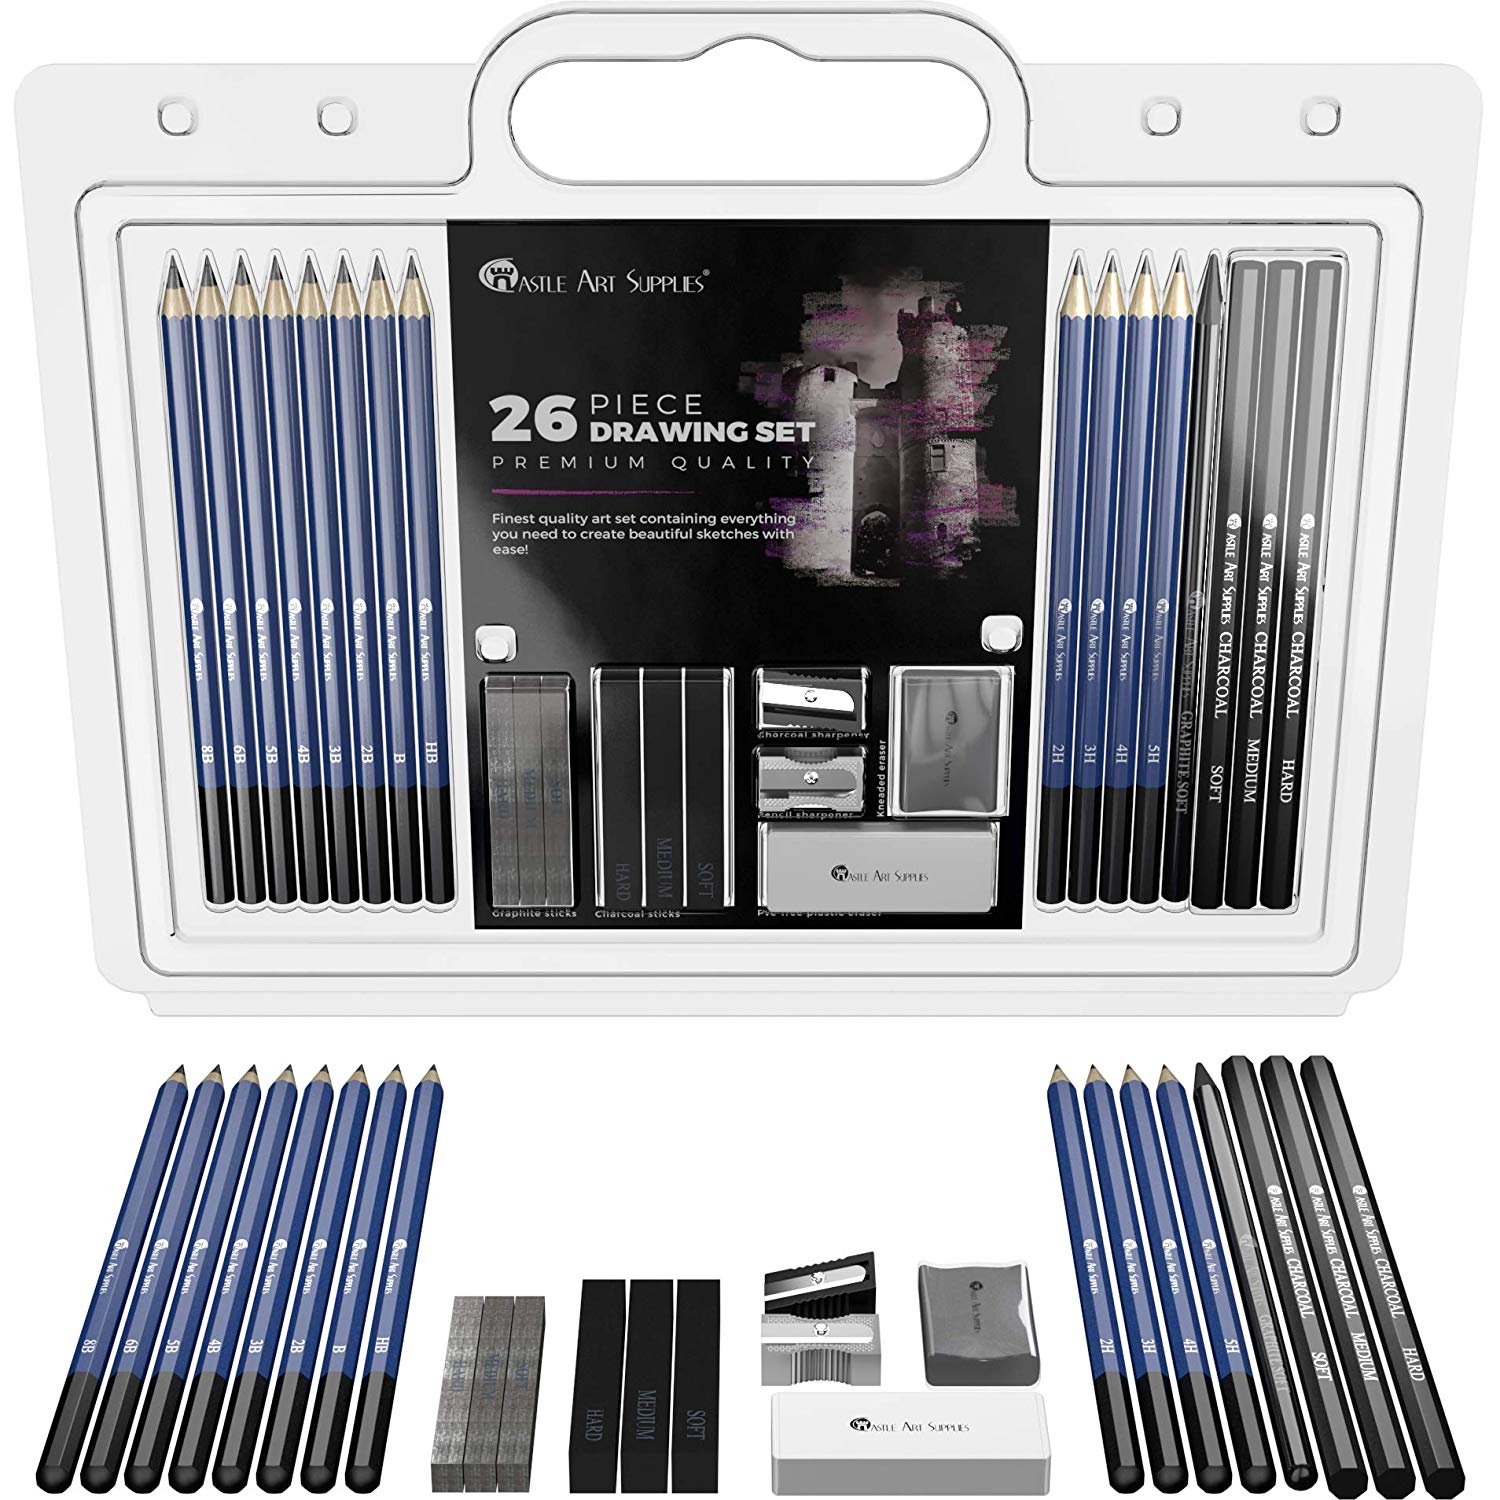 CASTLE ART SUPPLIES 26 PIECE DRAWING AND SKETCHING PENCIL ART SET